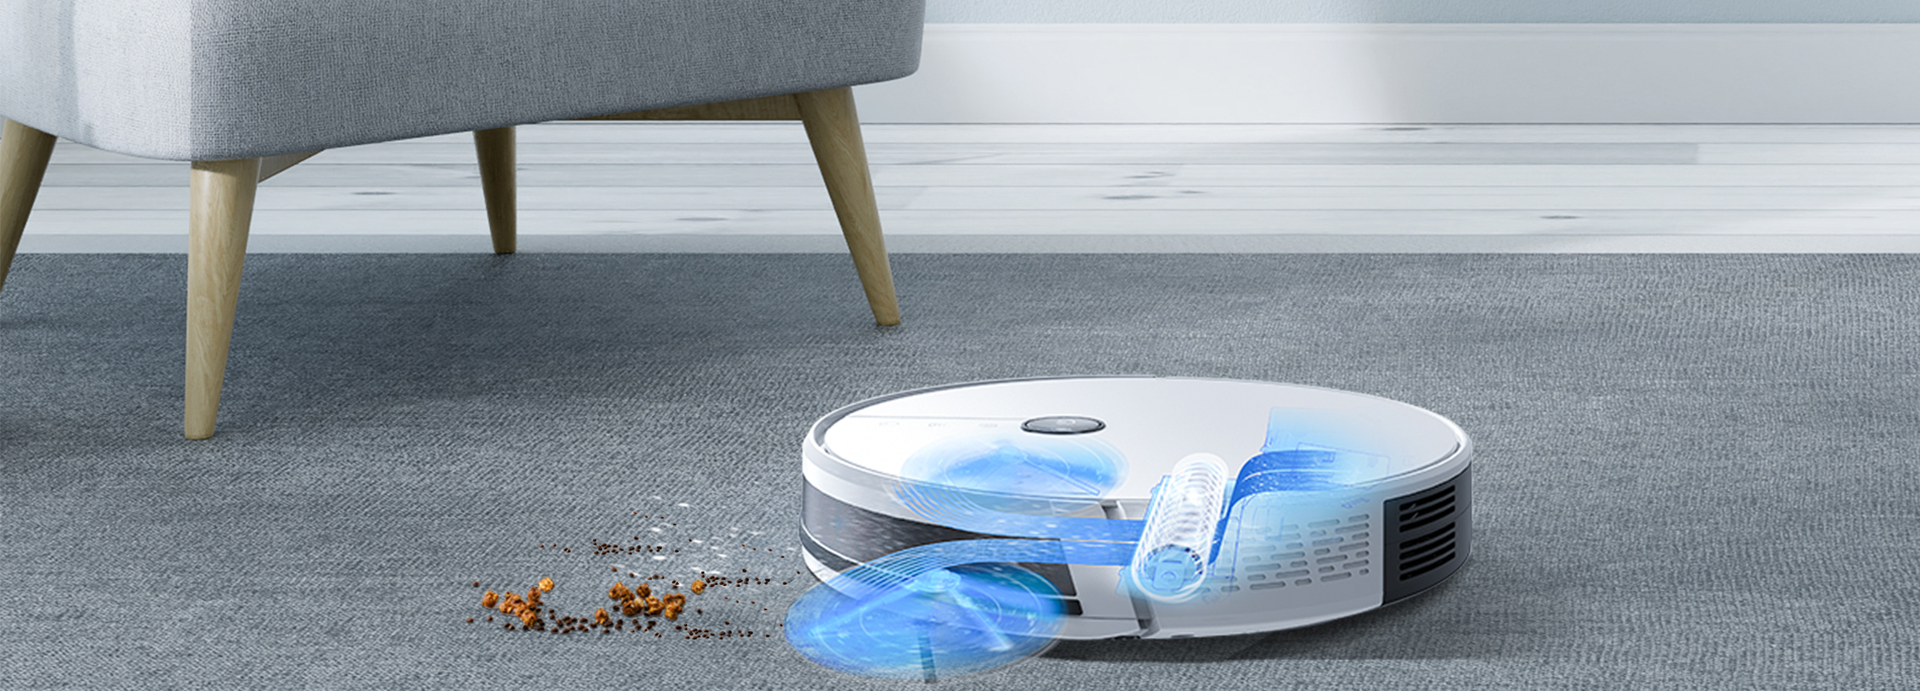 BR150 Random Robot Vacuum with Vacuuming and Mopping Simultaneously